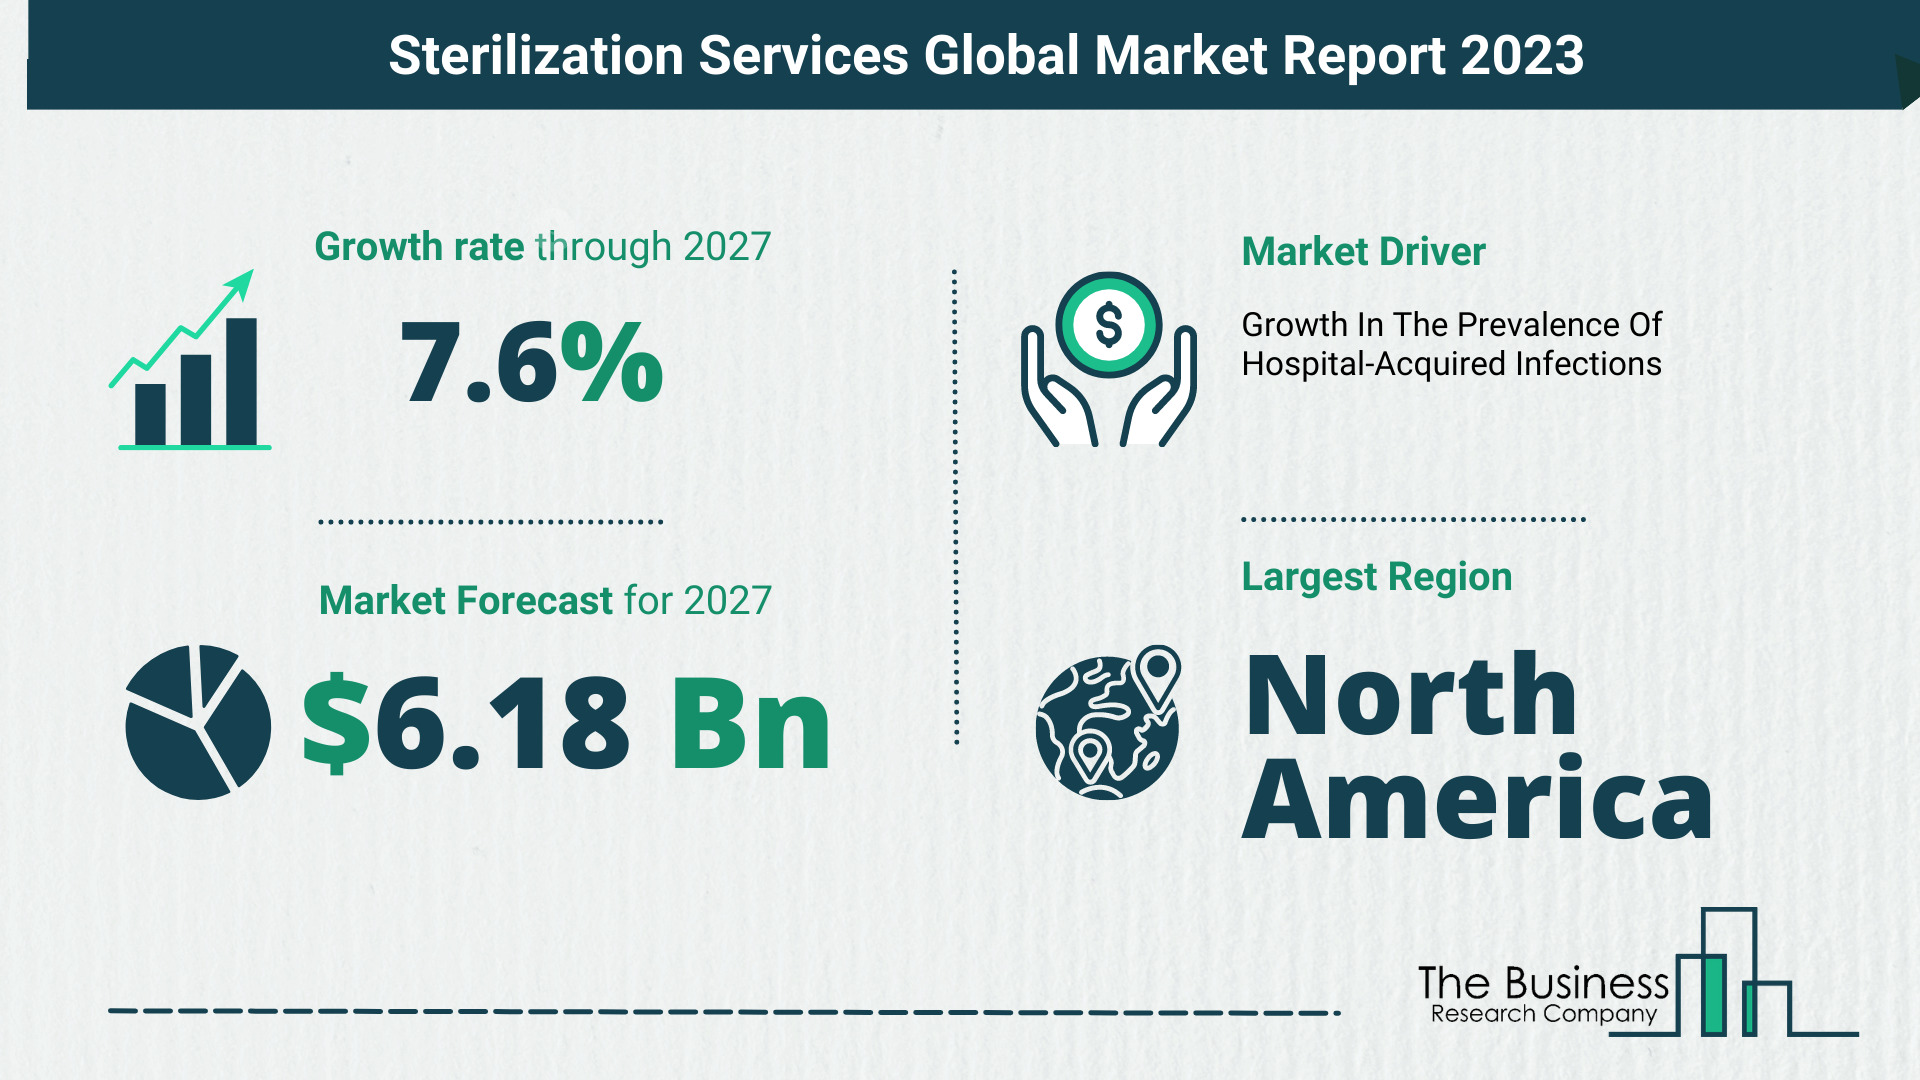 Sterilization Services Market Size, Share, And Growth Rate Analysis 2023